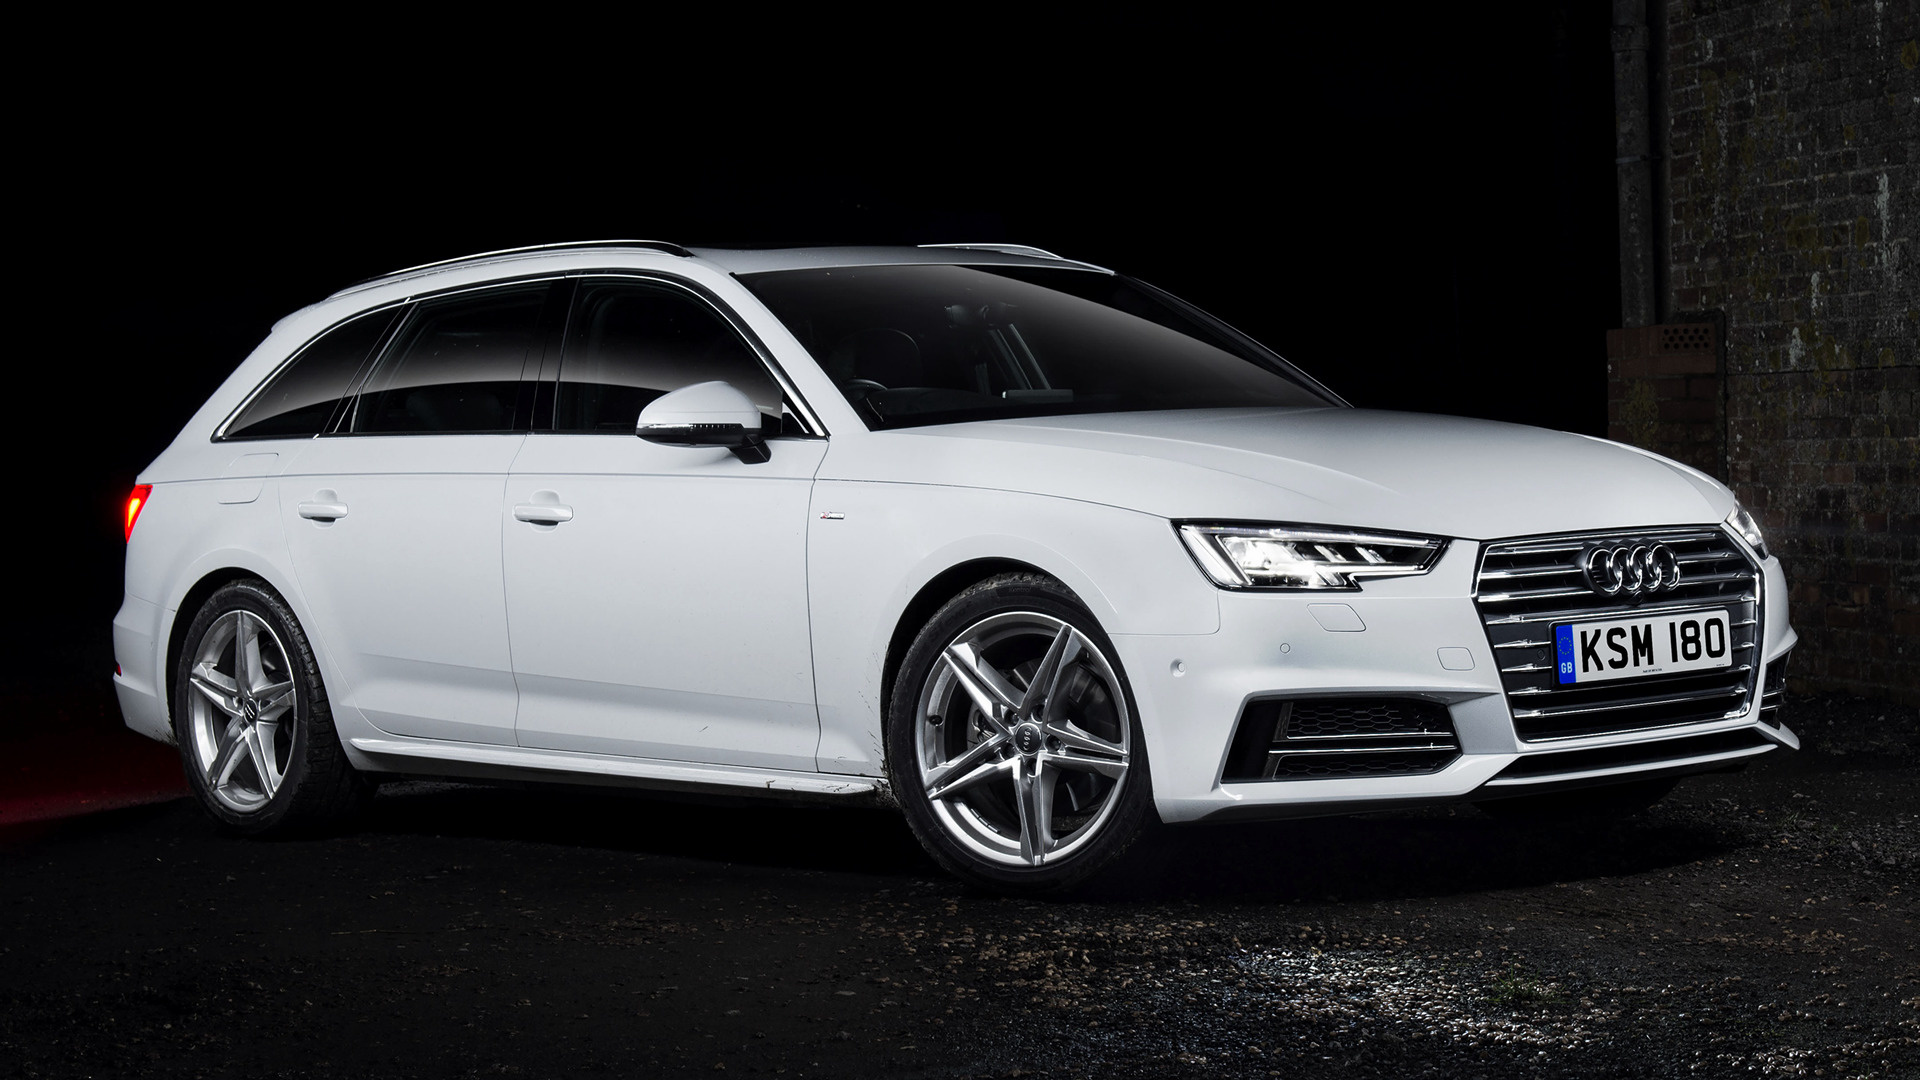 Kneden overstroming Autonoom 2015 Audi A4 Avant S line (UK) - Wallpapers and HD Images | Car Pixel